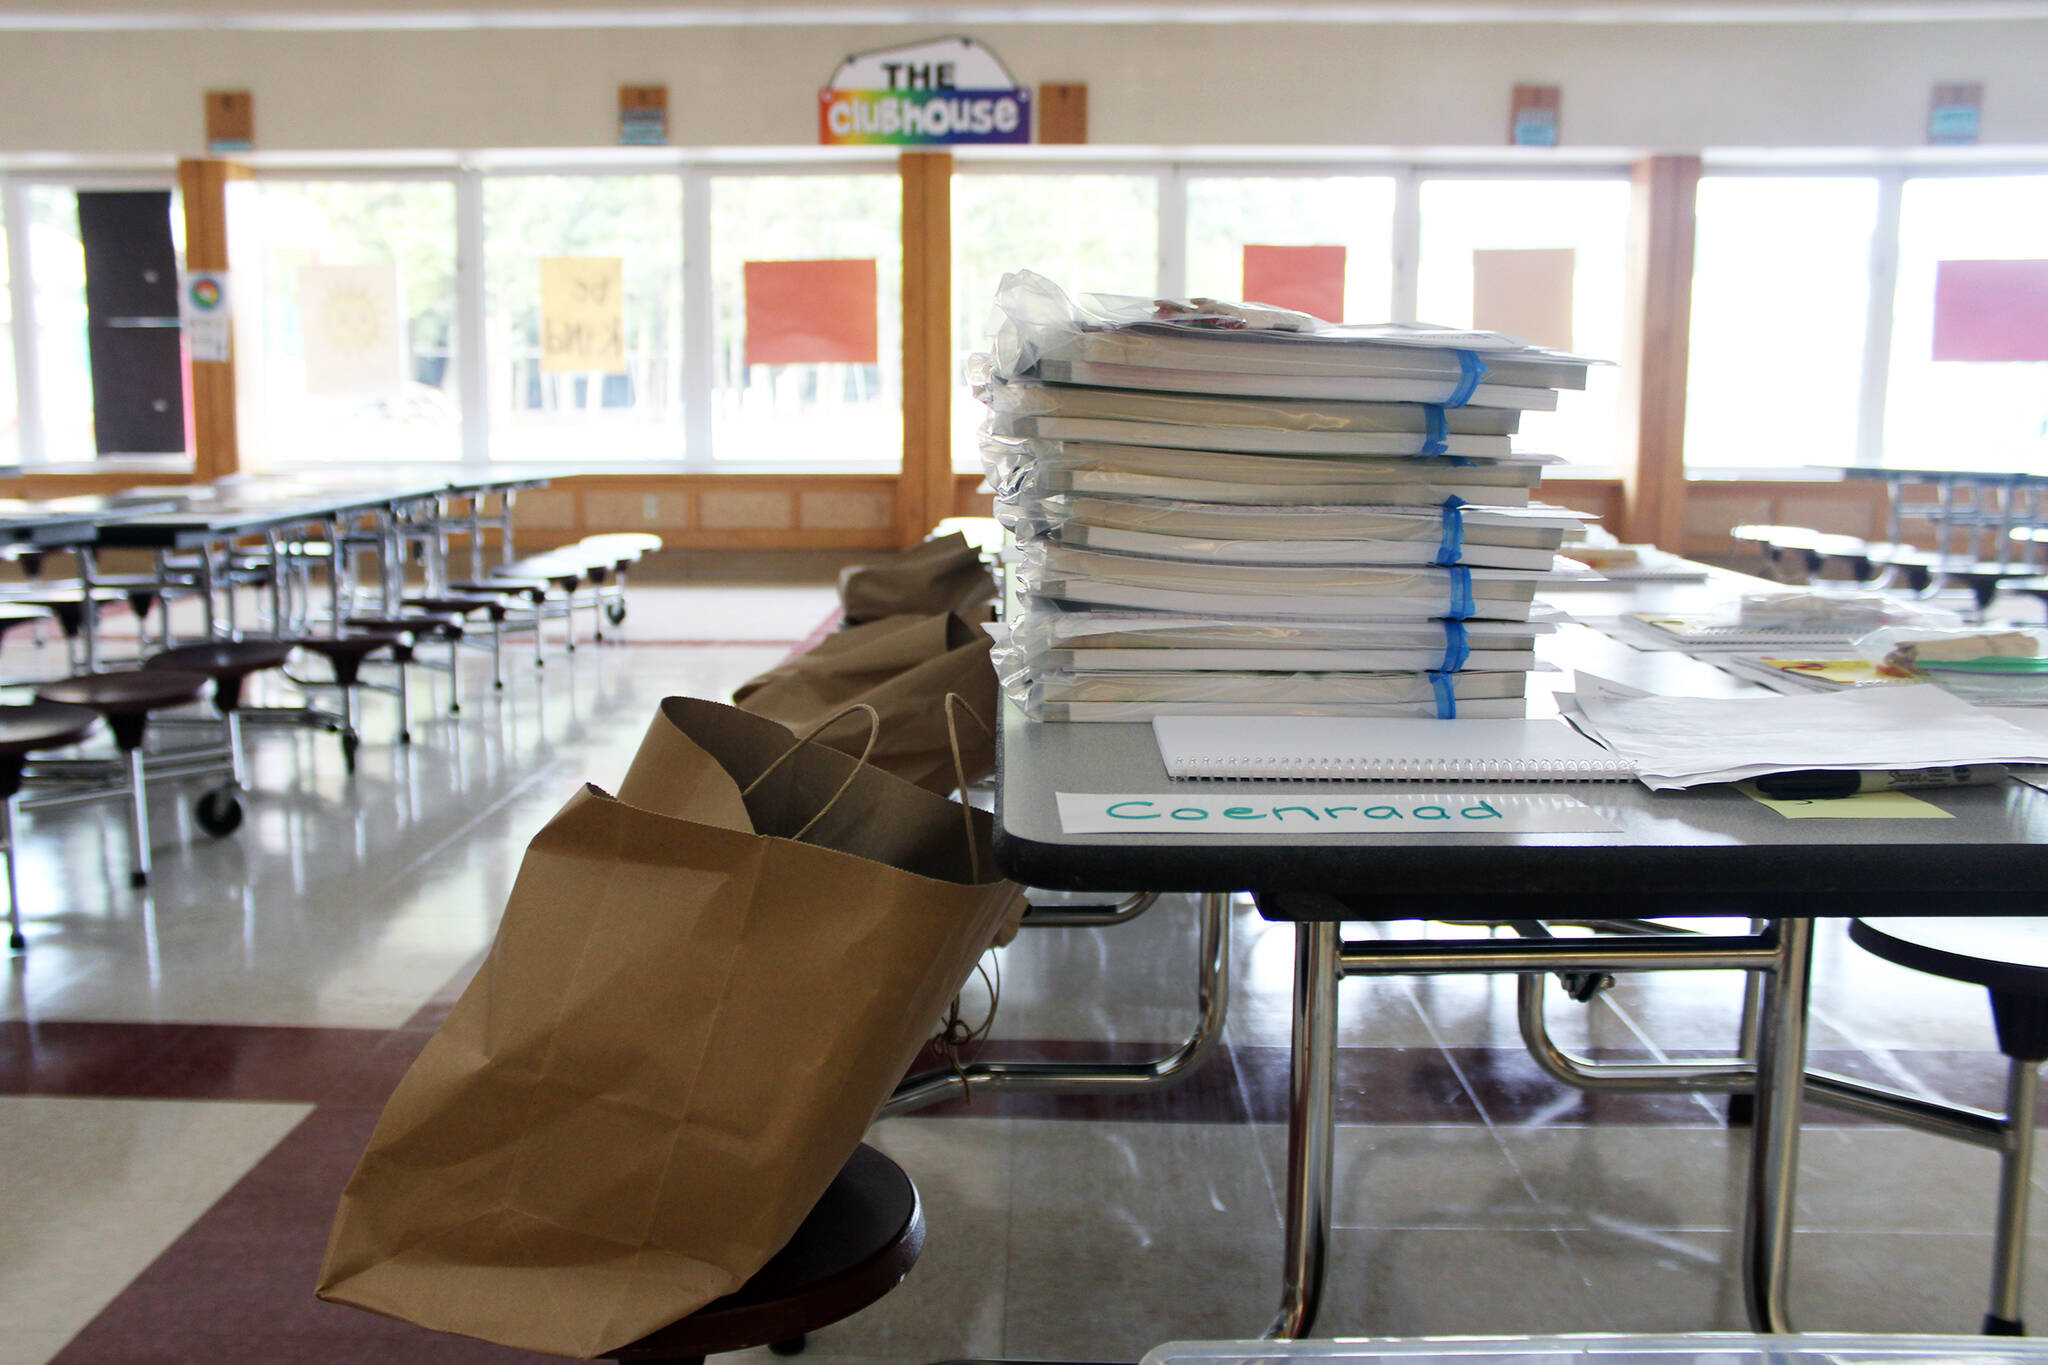 Learning bundles await pickup at what is now known as Kax̱digoowú Héen Elementary School on Friday, Sept. 4, 2020. The school’s name was officially changed Tuesday night after much debate. It was previously named Riverbend Elementary School. (Ben Hohenstatt / Juneau Empire File)